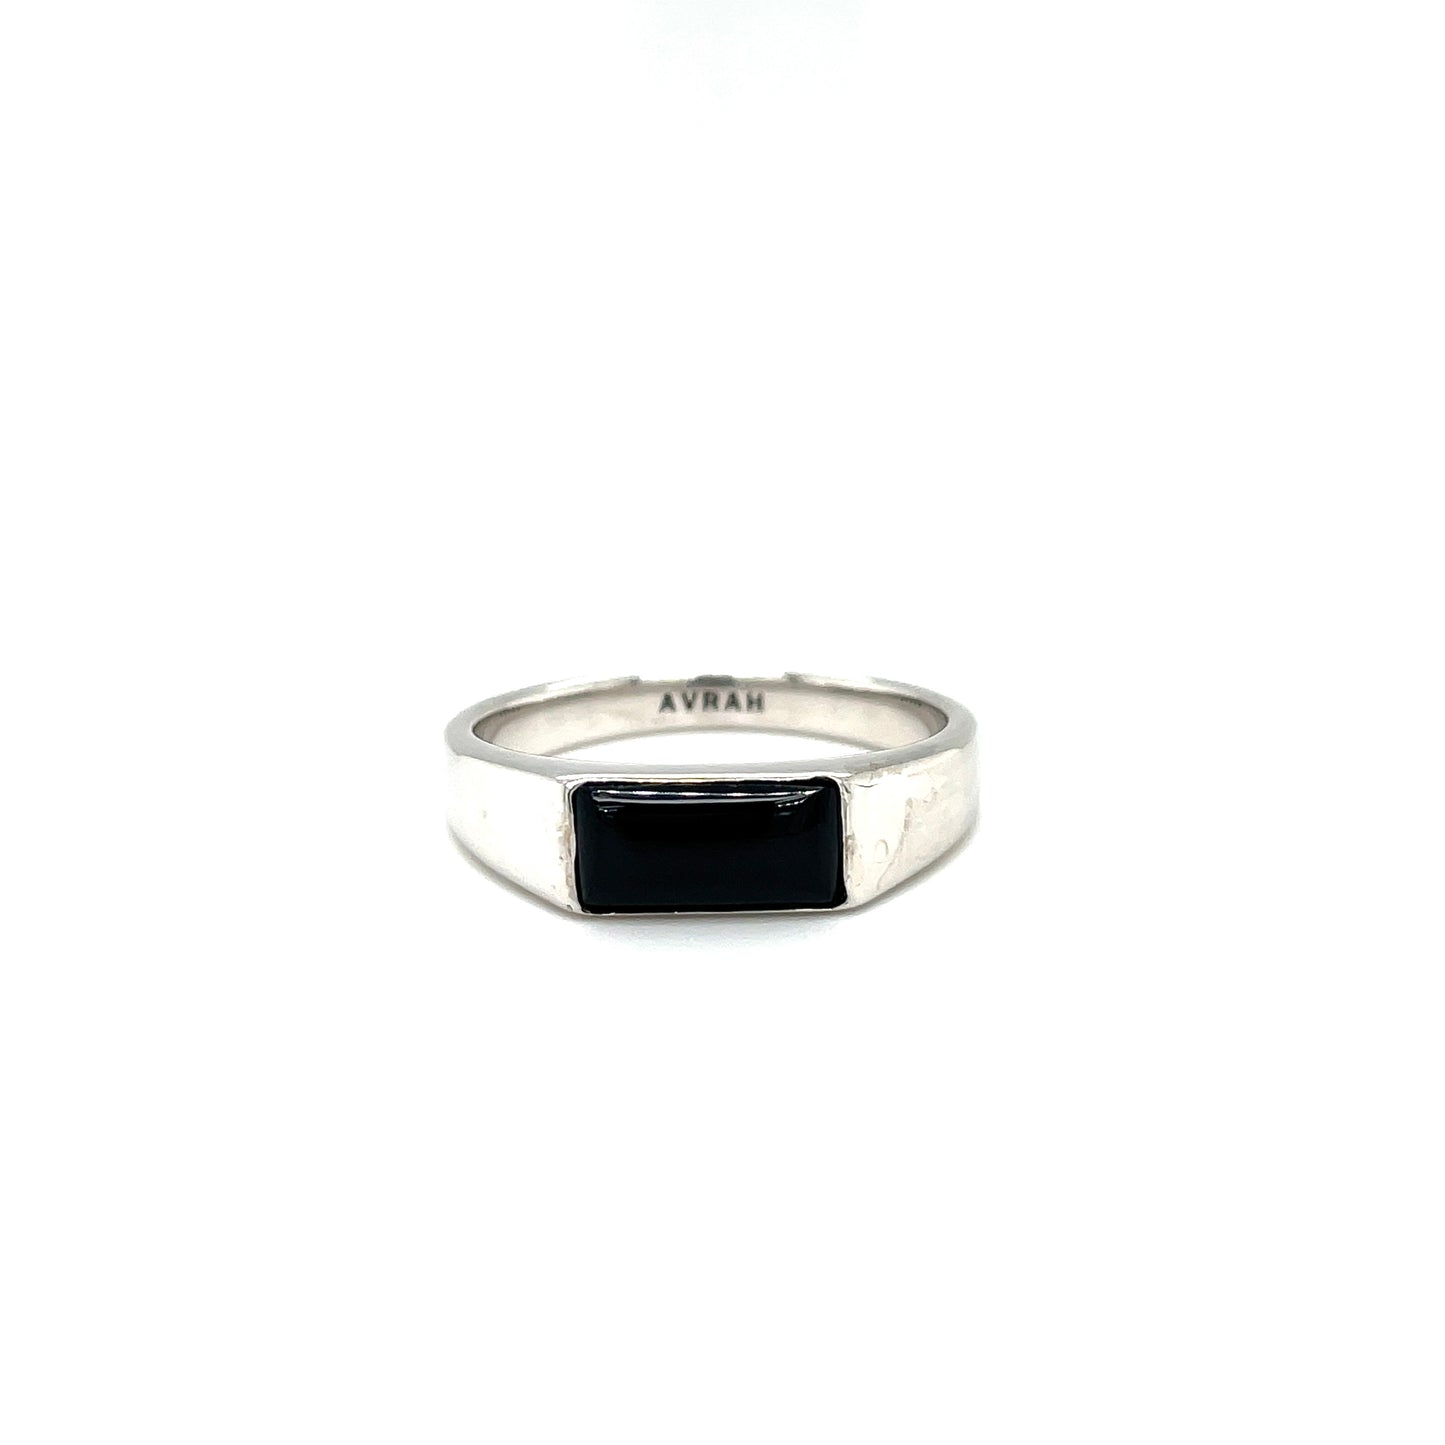 AVRAH - Sterling Silver and Onyx Signet Ring